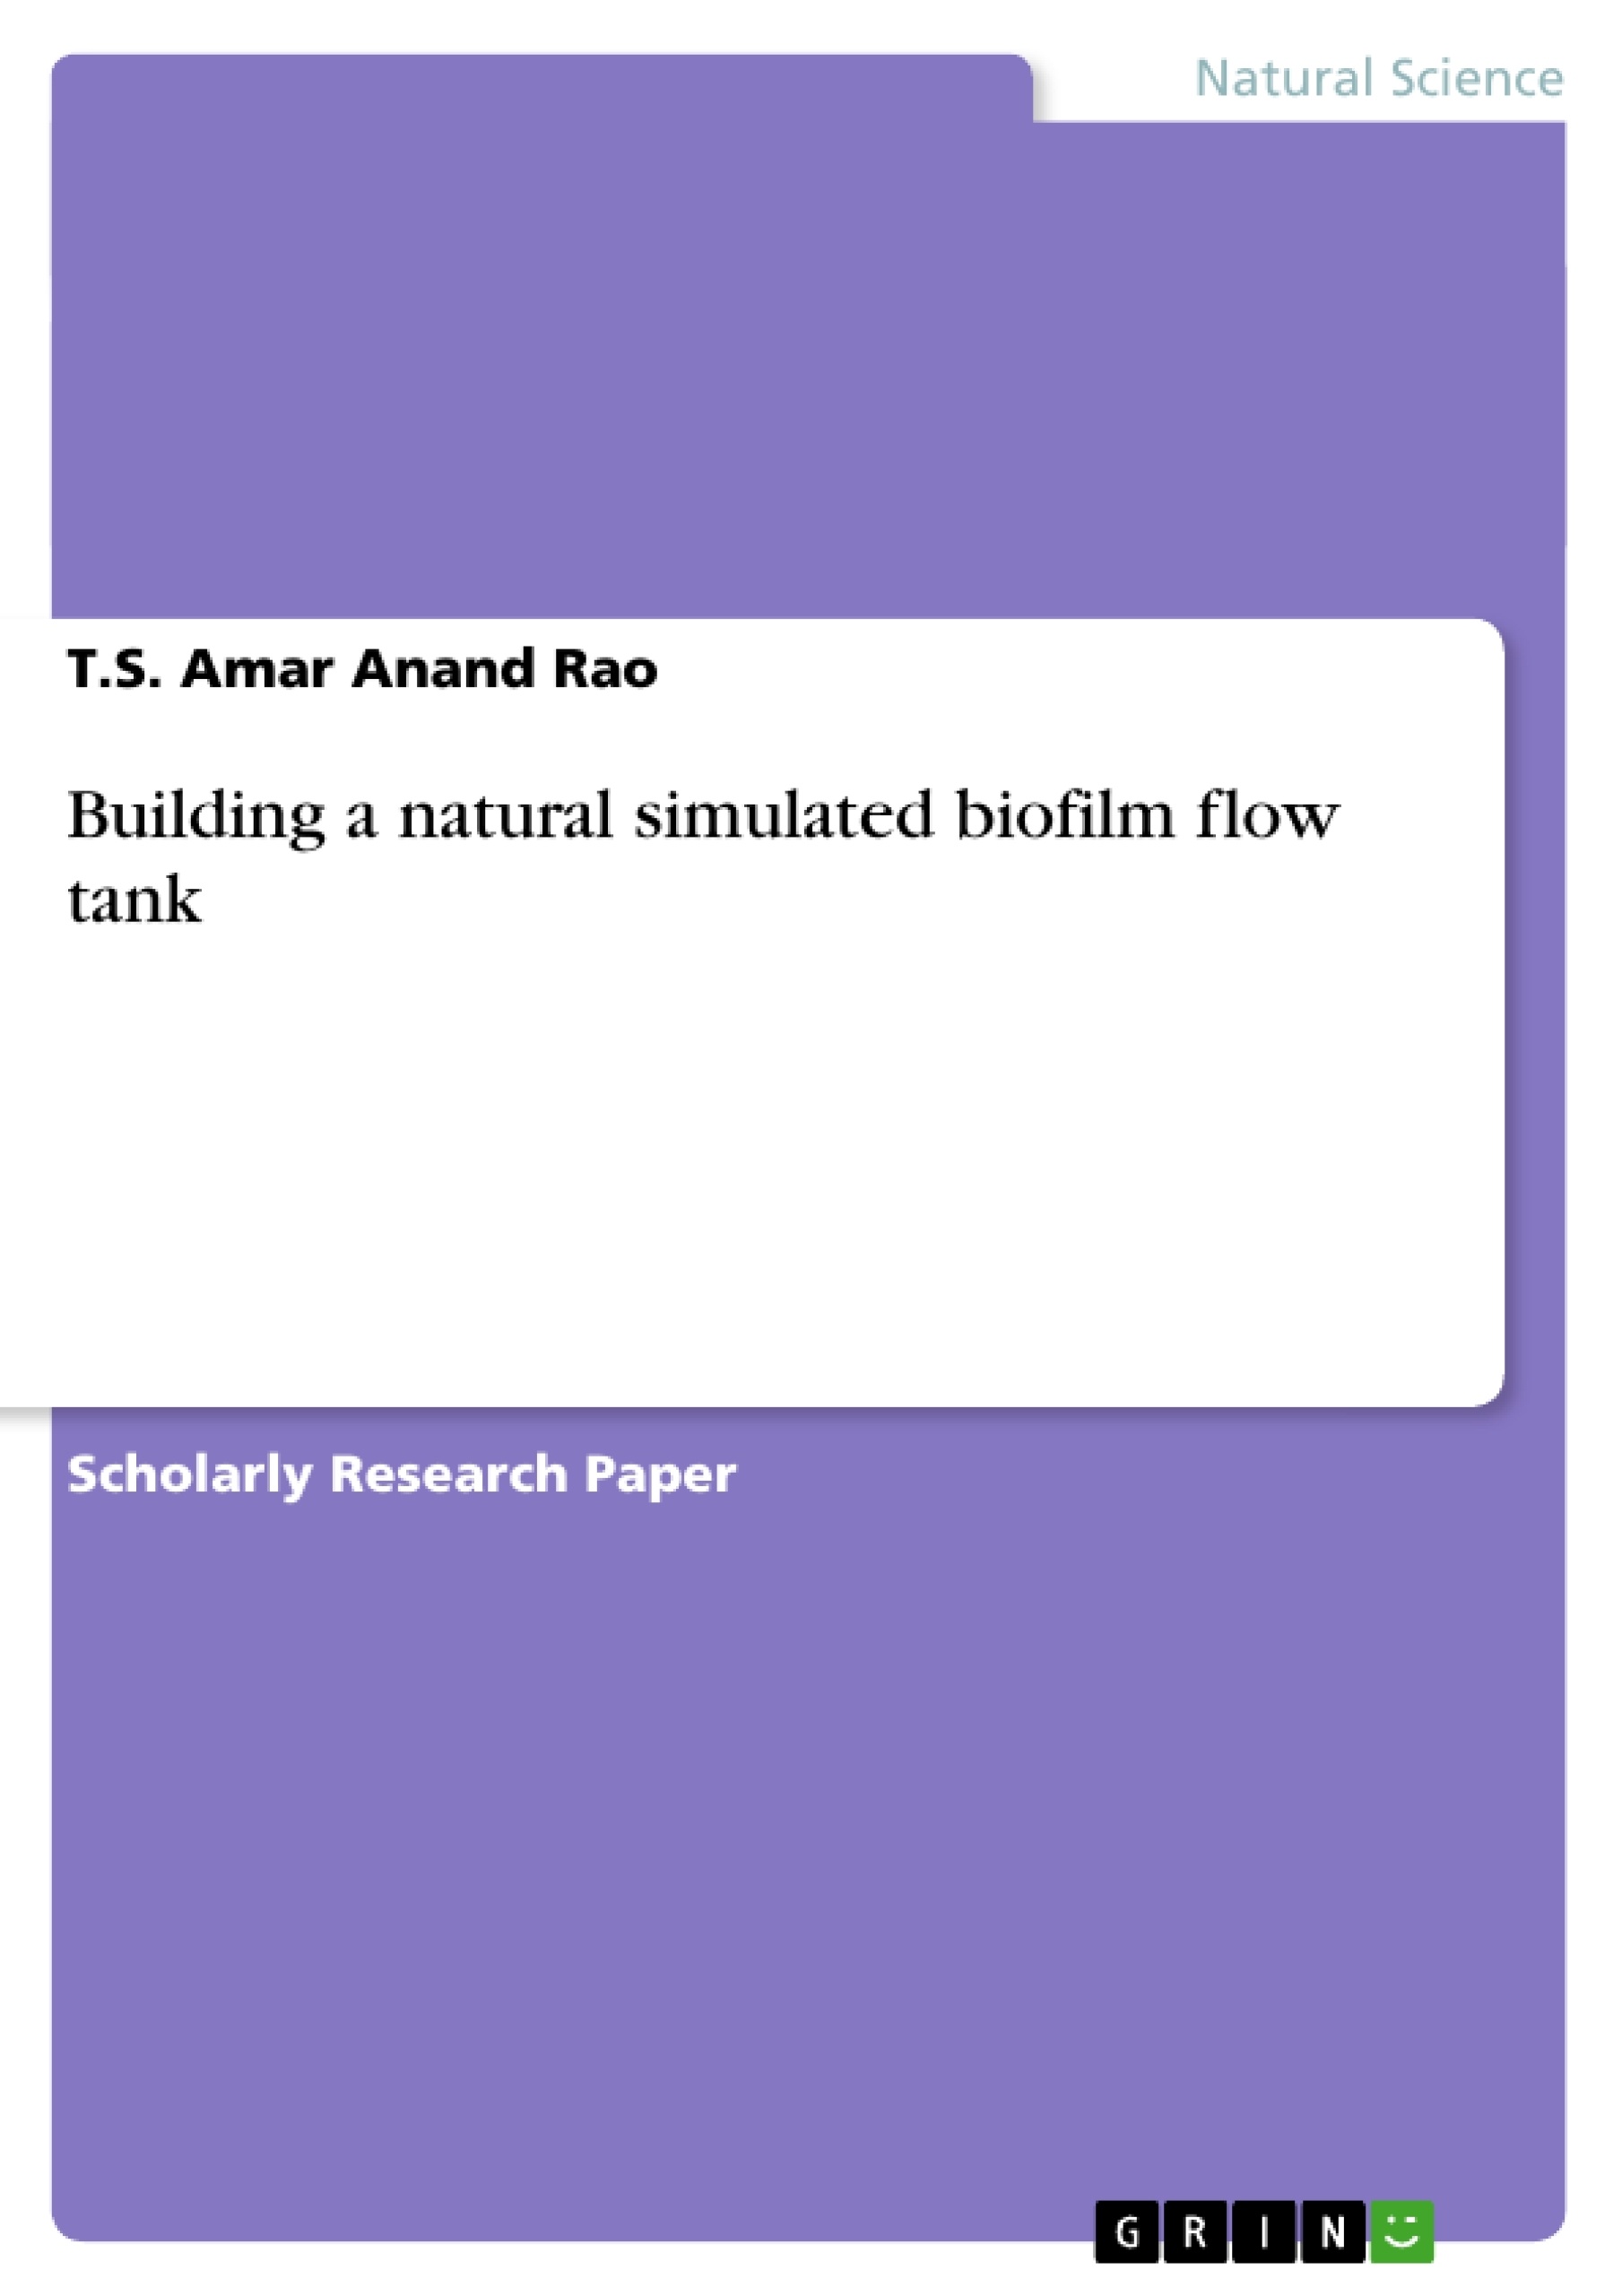 Titel: Building a natural simulated biofilm flow tank